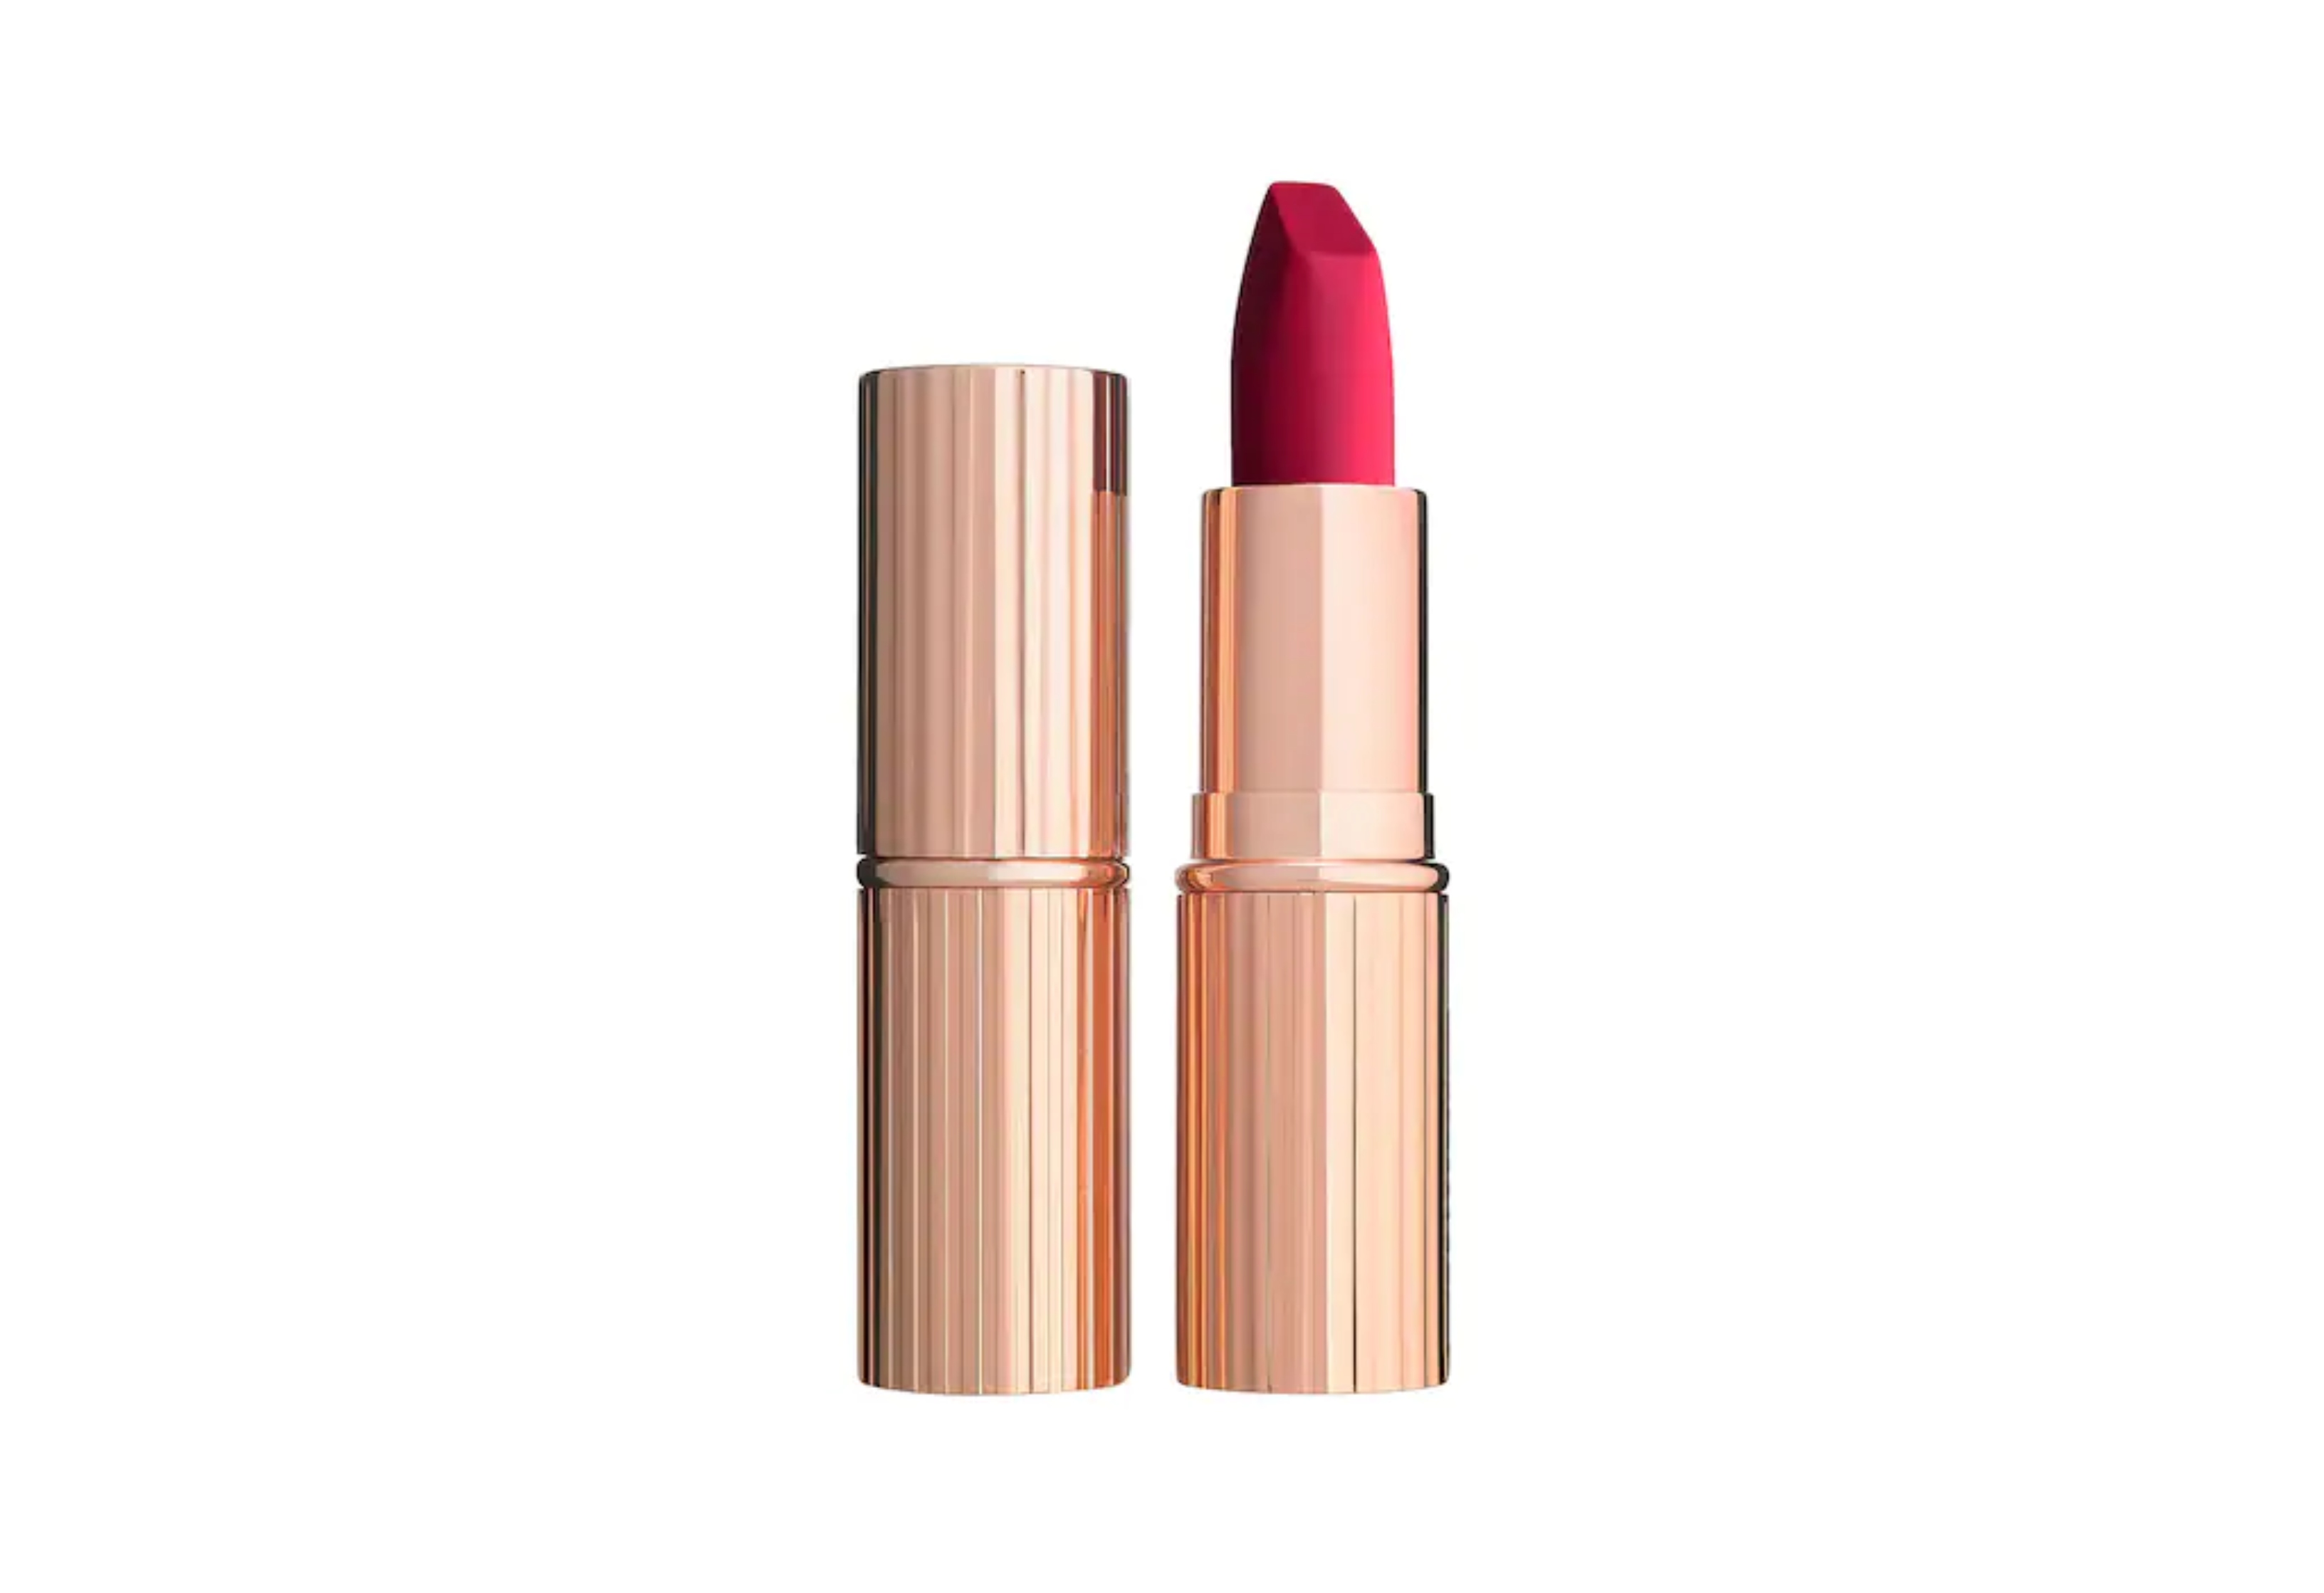 'Matte Revolution' lipstick in the shade 'The Queen' by Charlotte Tilbury